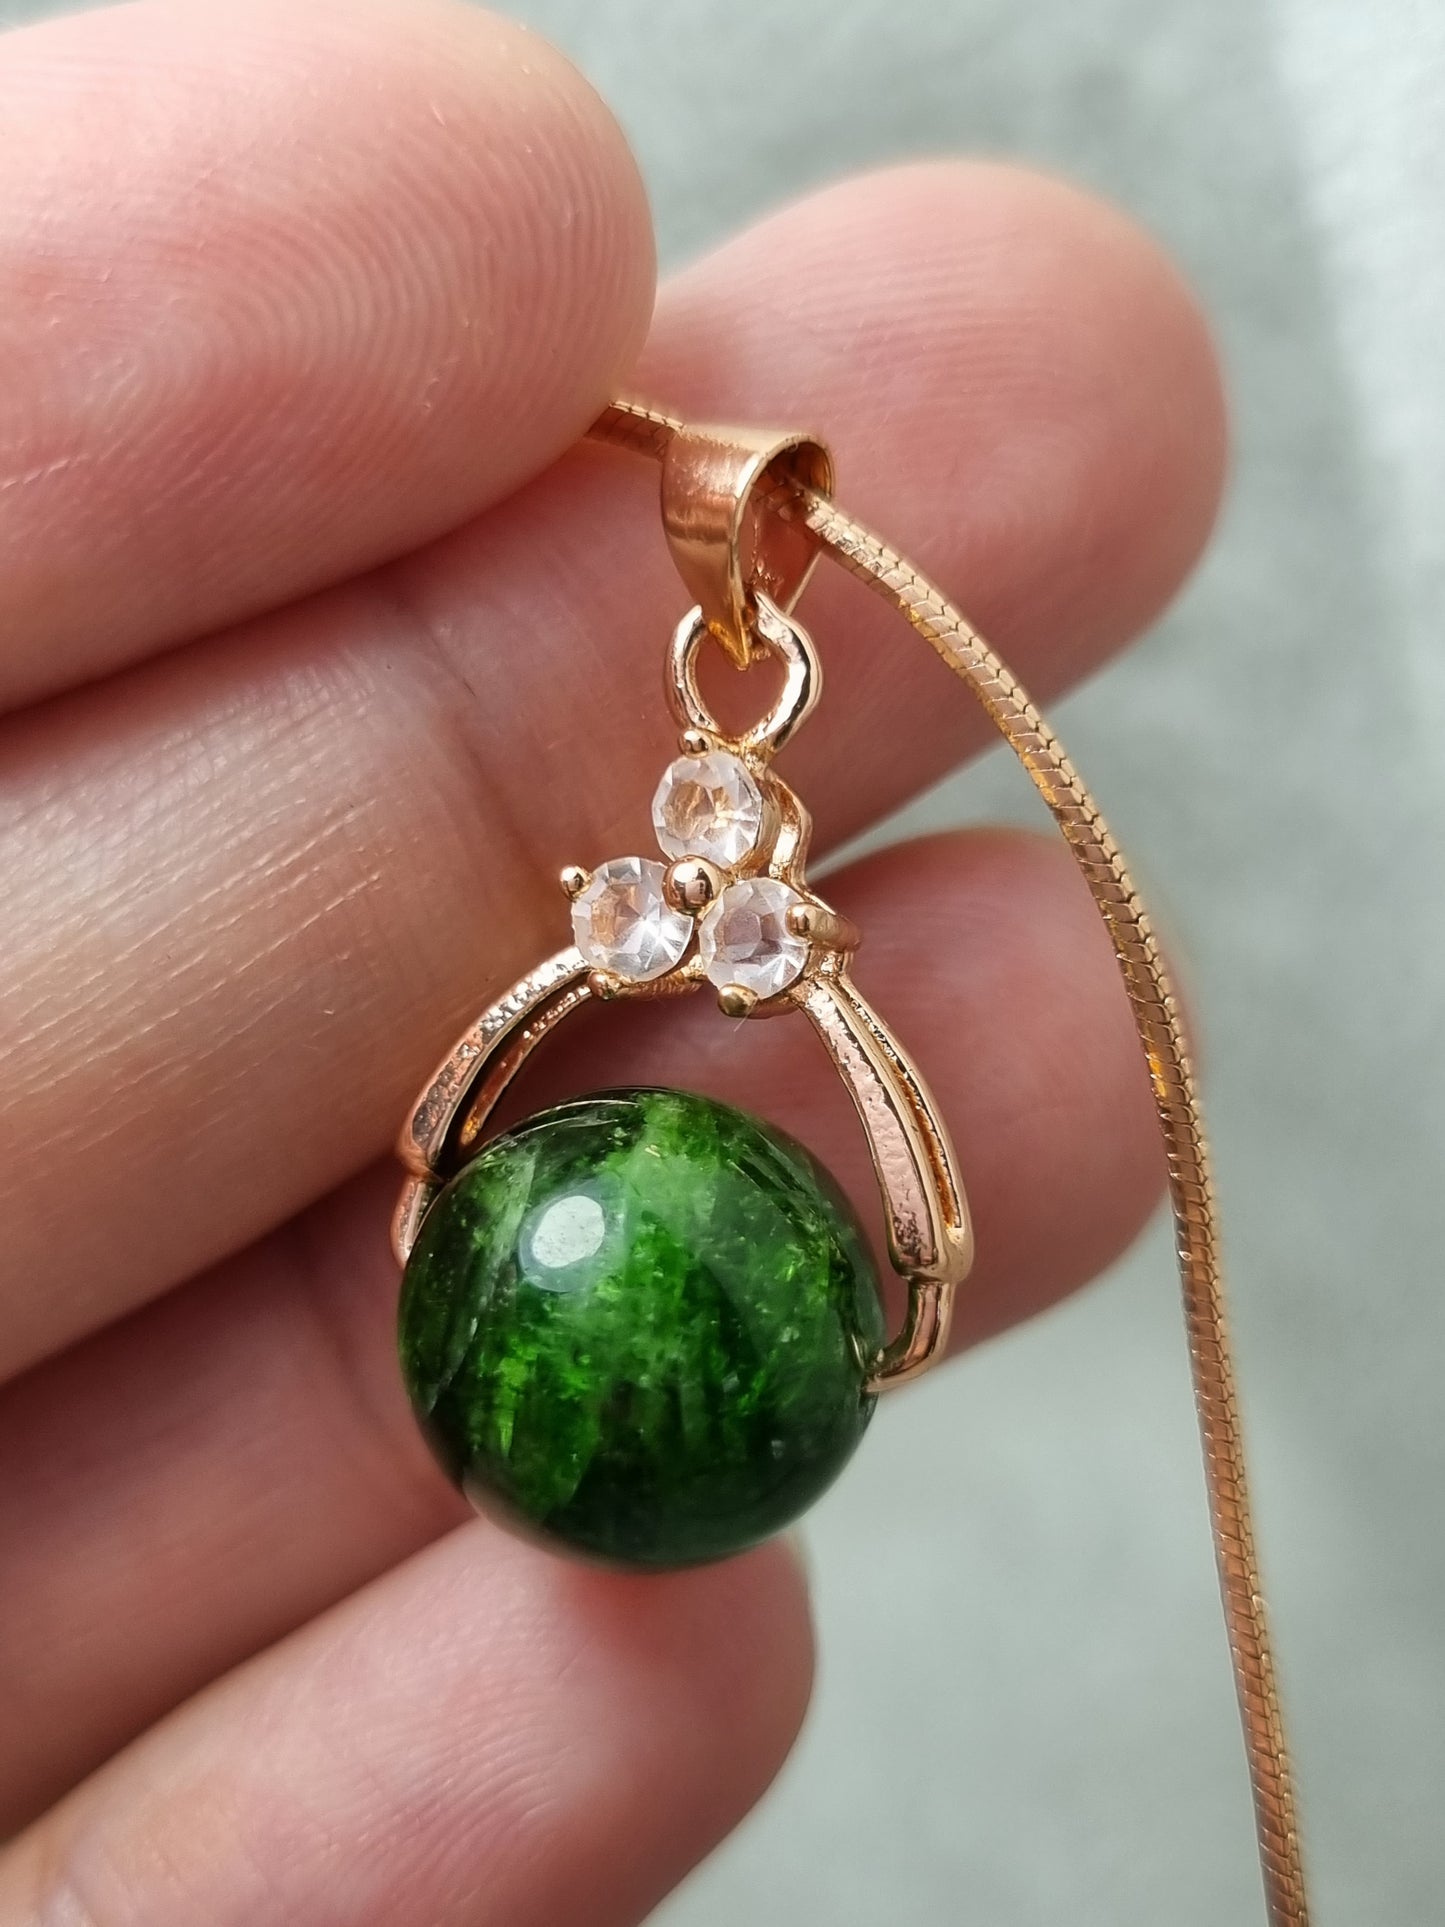 High Quality Chrome Diopside Crystal Bead Pendant, Gem Necklace Healing Crystal Necklace